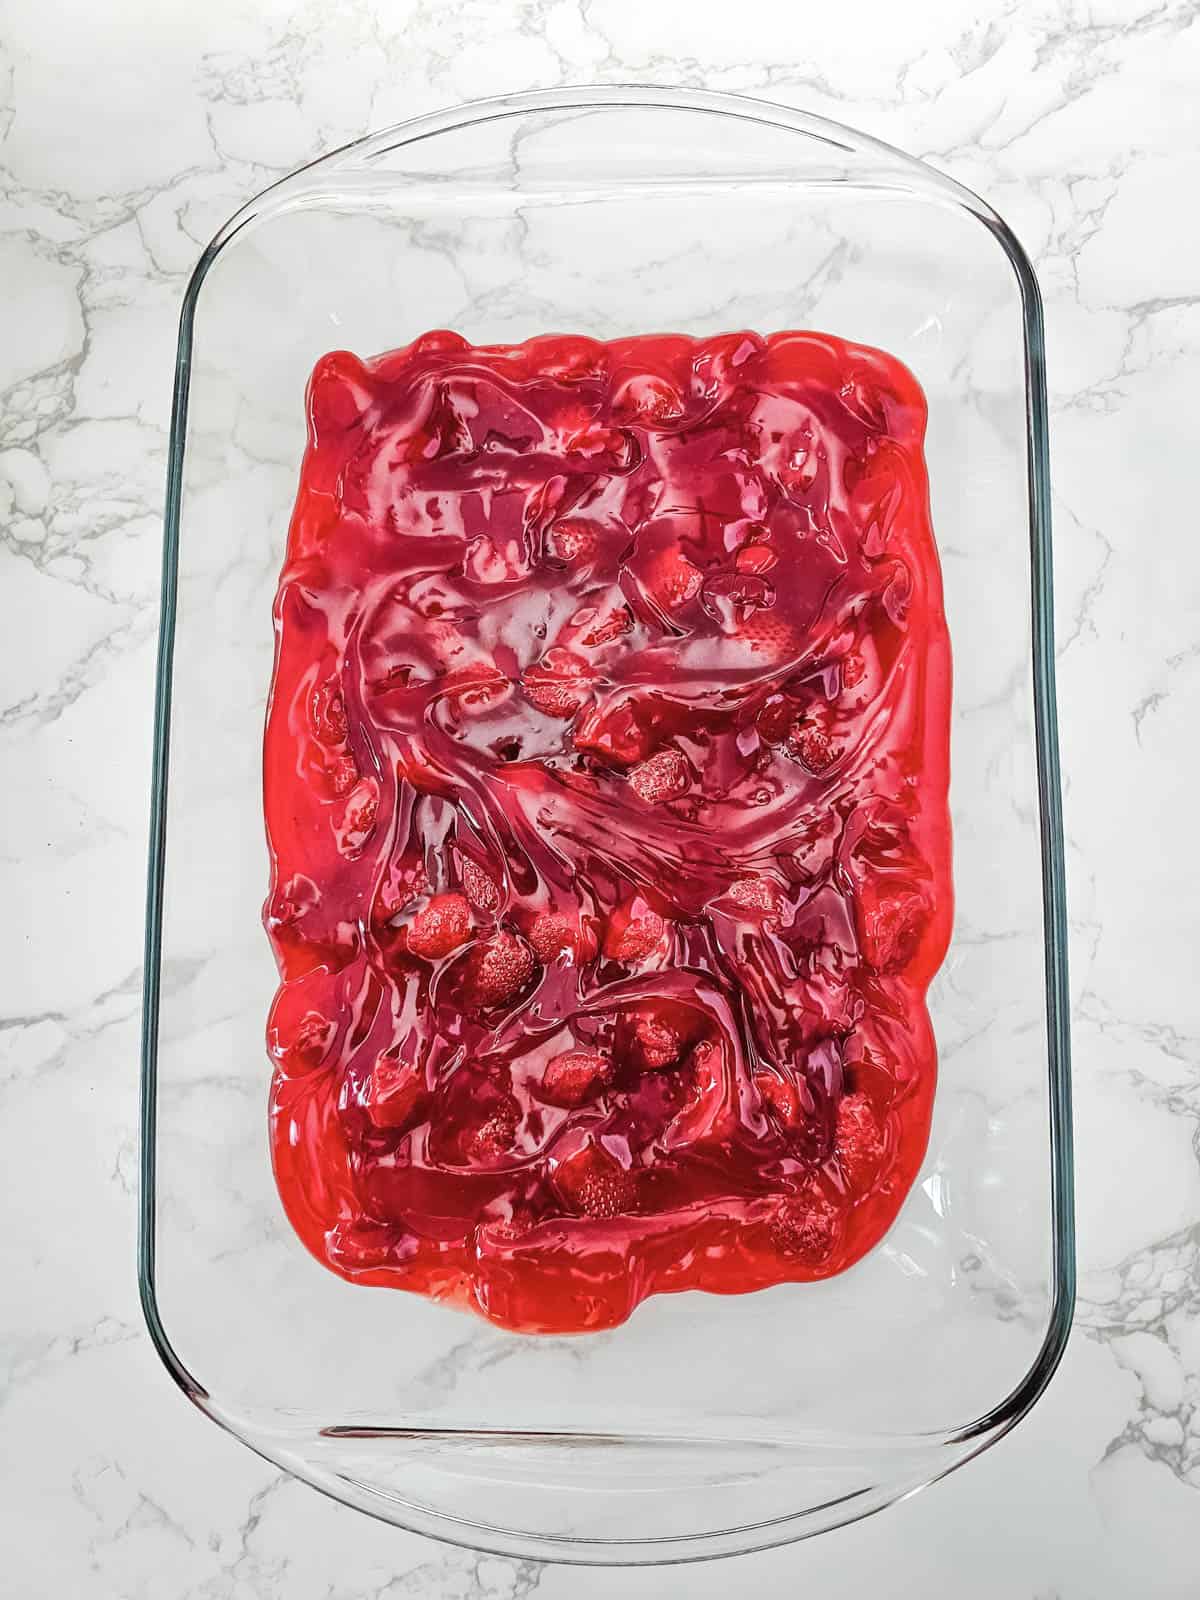 Strawberry pie filling spread evenly in a baking dish.